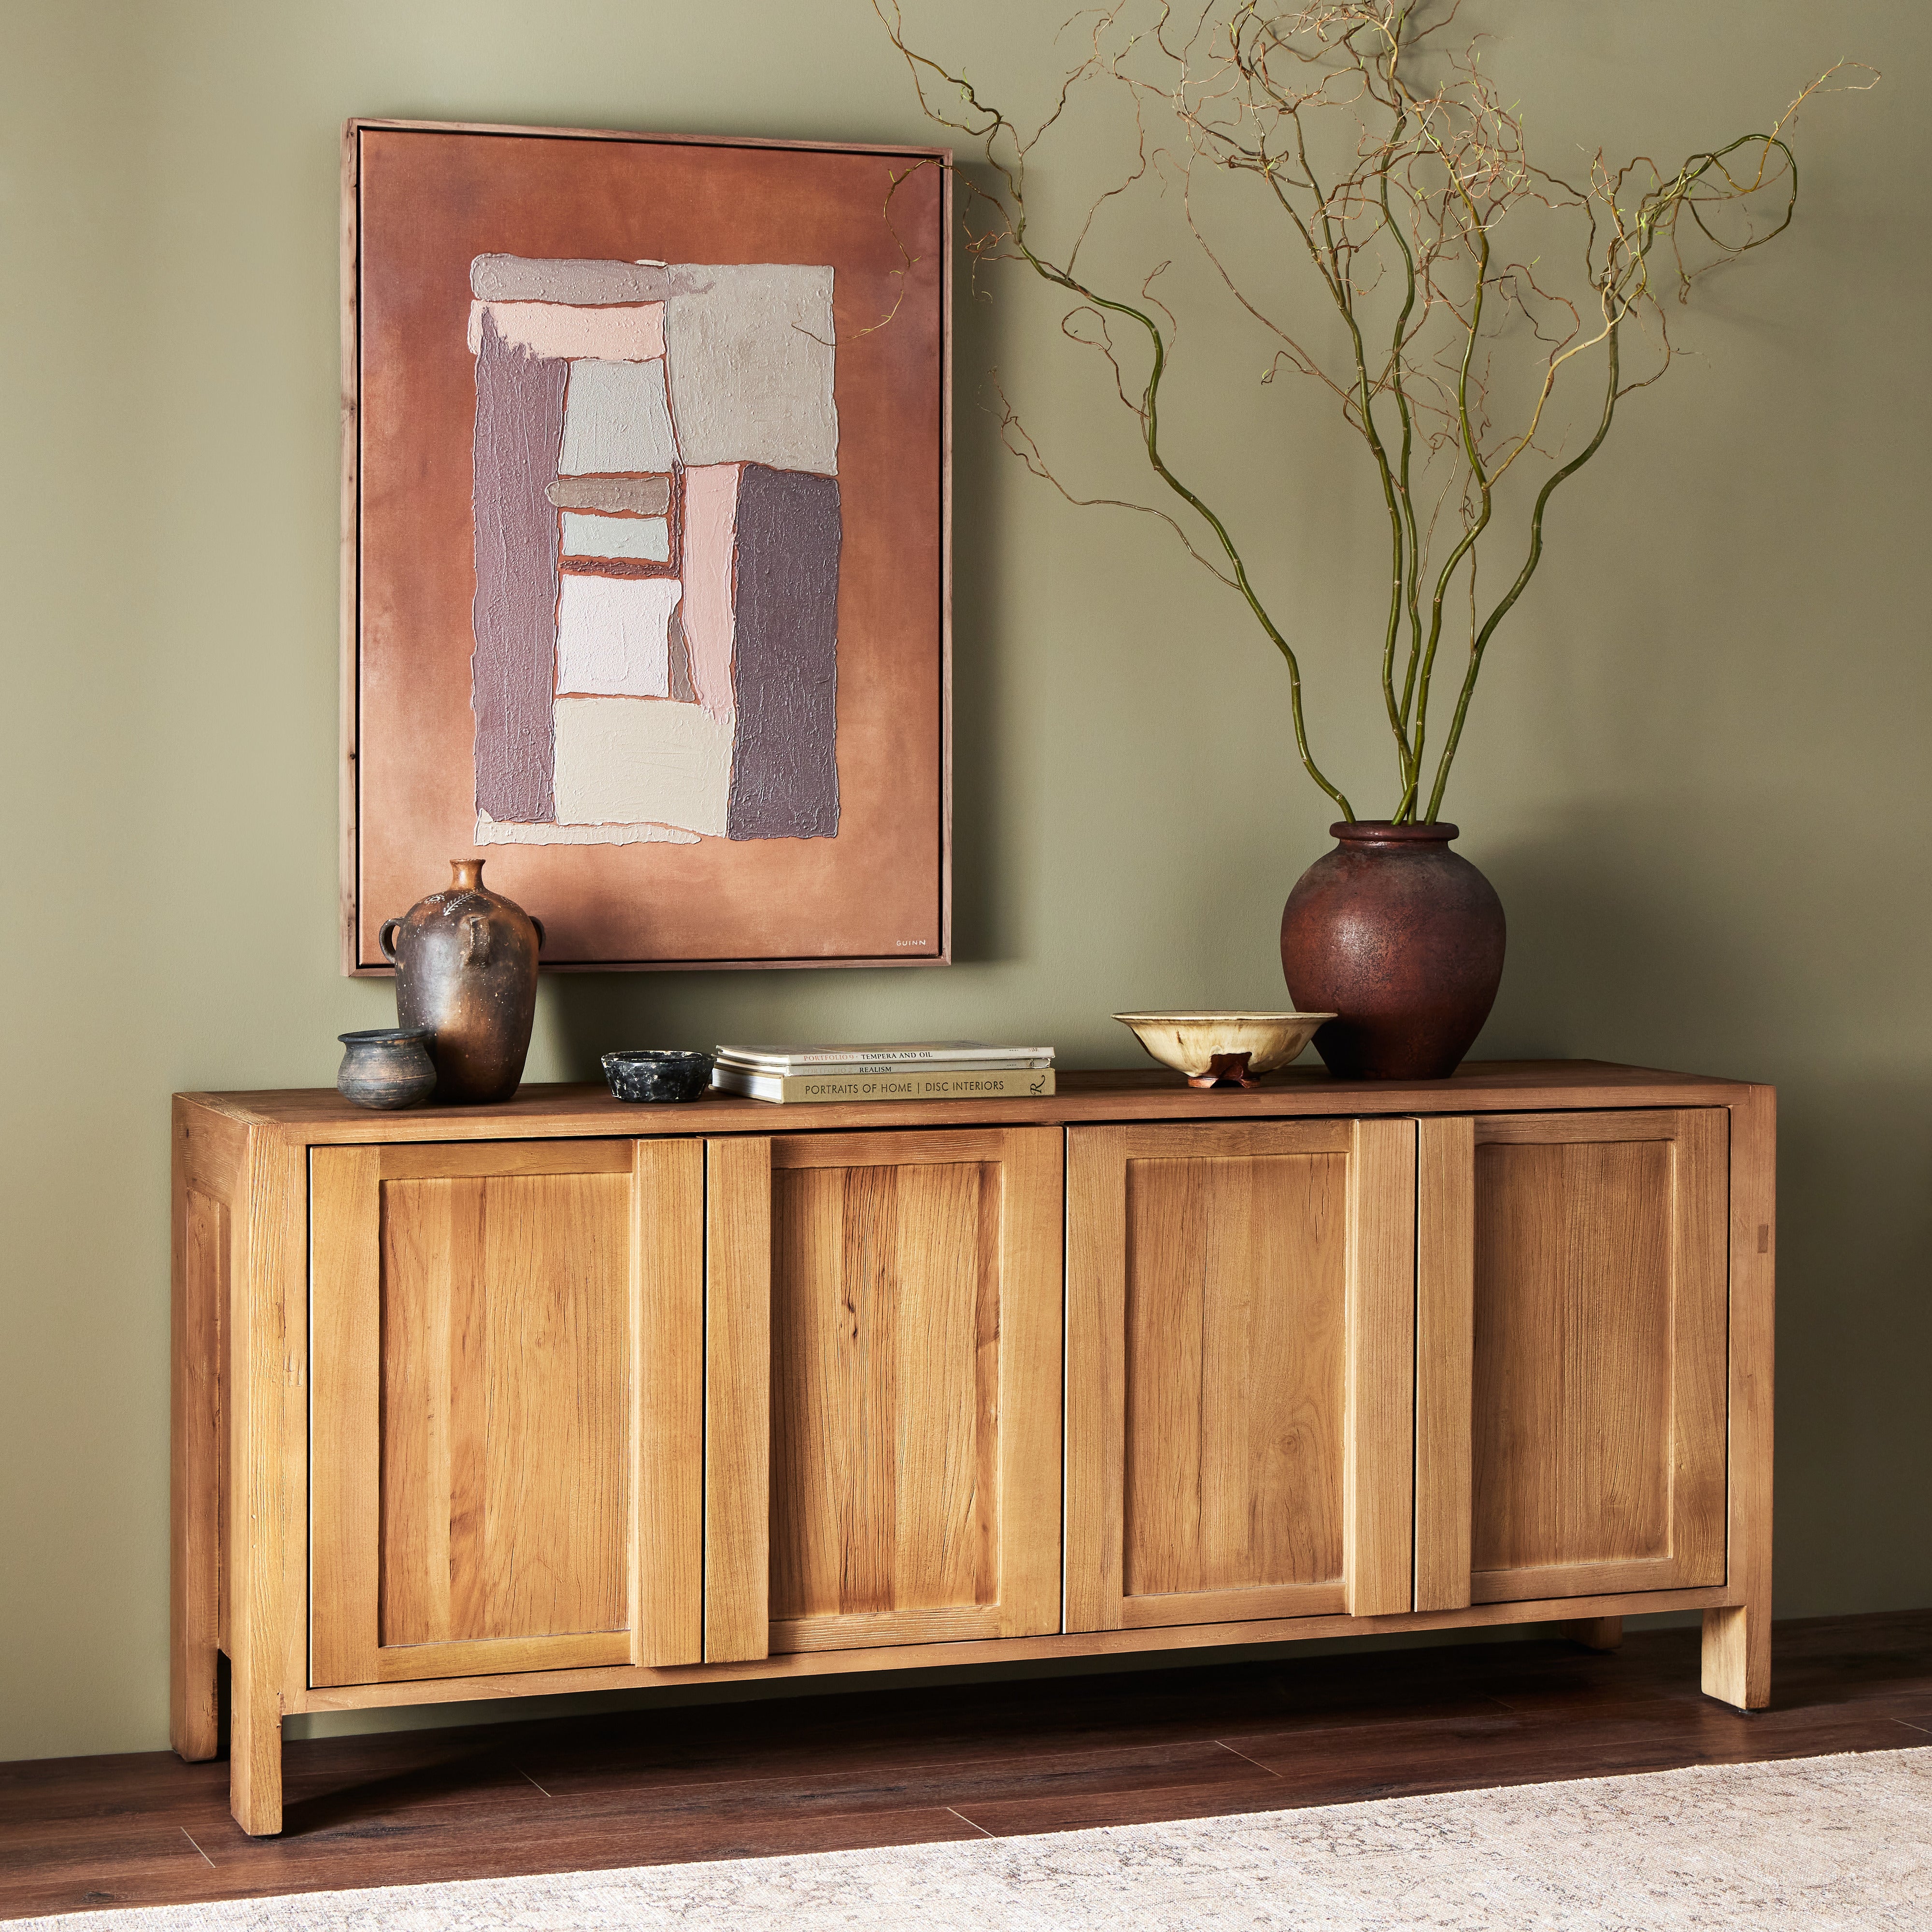 Inspired by Swedish folk design, natural elm crafts the frame and panel structure of this sideboard. Designed without hardware, the raised panels of the doors have a cutout to serve as handles, offering a clean appearance that offers practical function. Amethyst Home provides interior design, new construction, custom furniture, and area rugs in the Boston metro area.